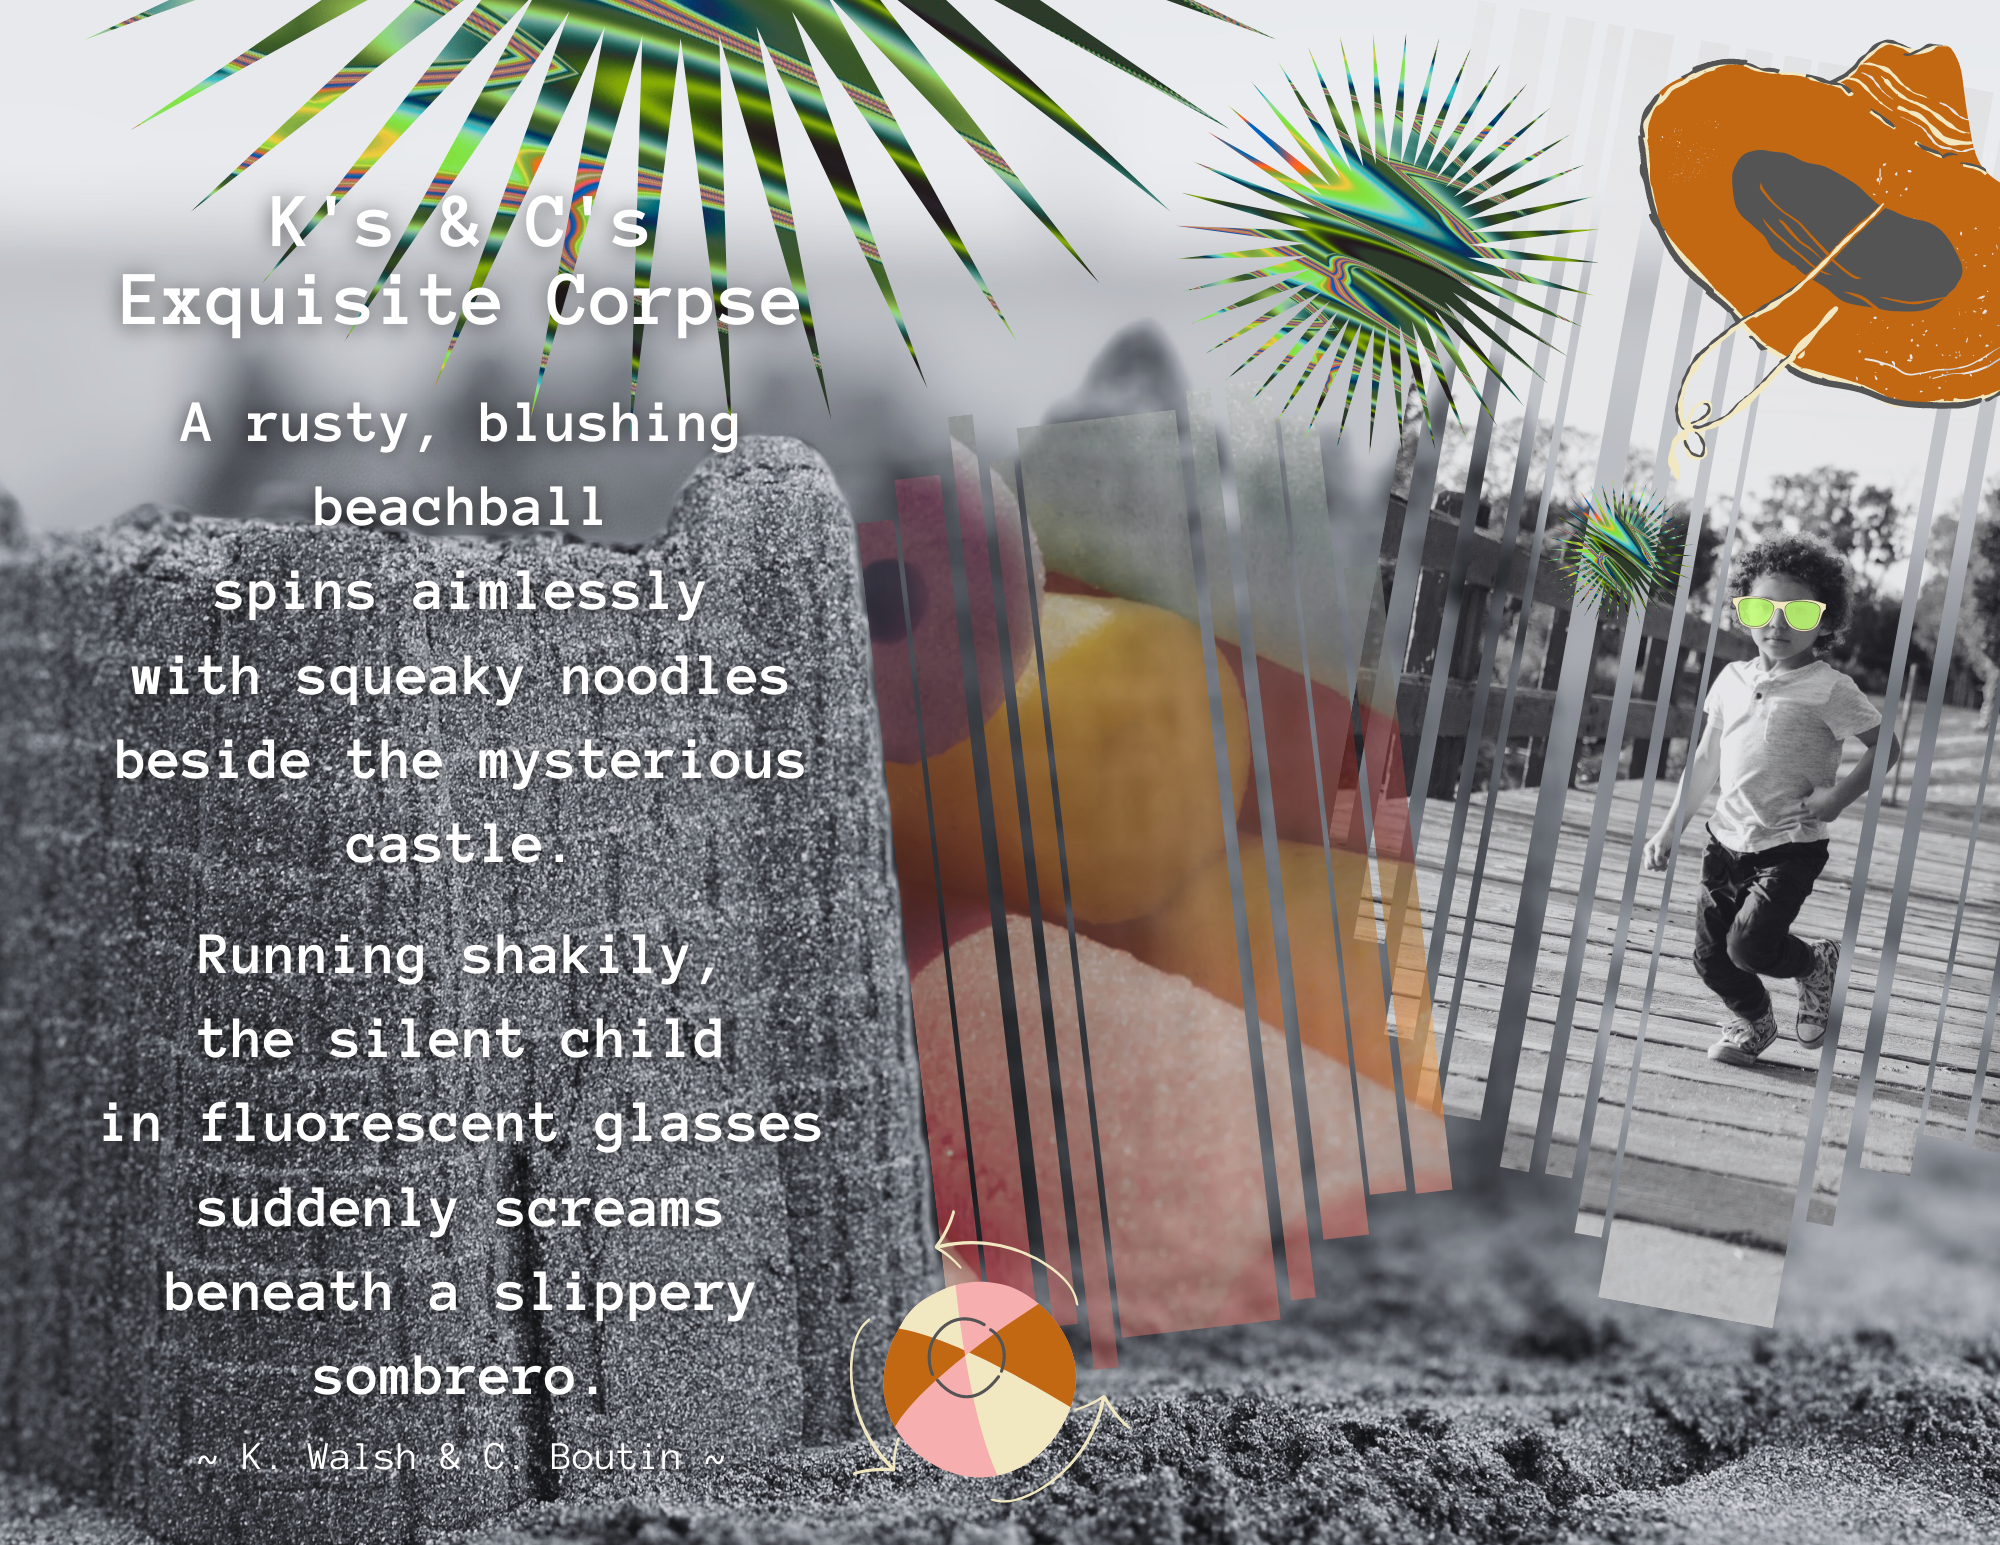 Poem against b&w background graphics (noise, noodles, beachball, sombrero, boy running, sandcastle) with poem